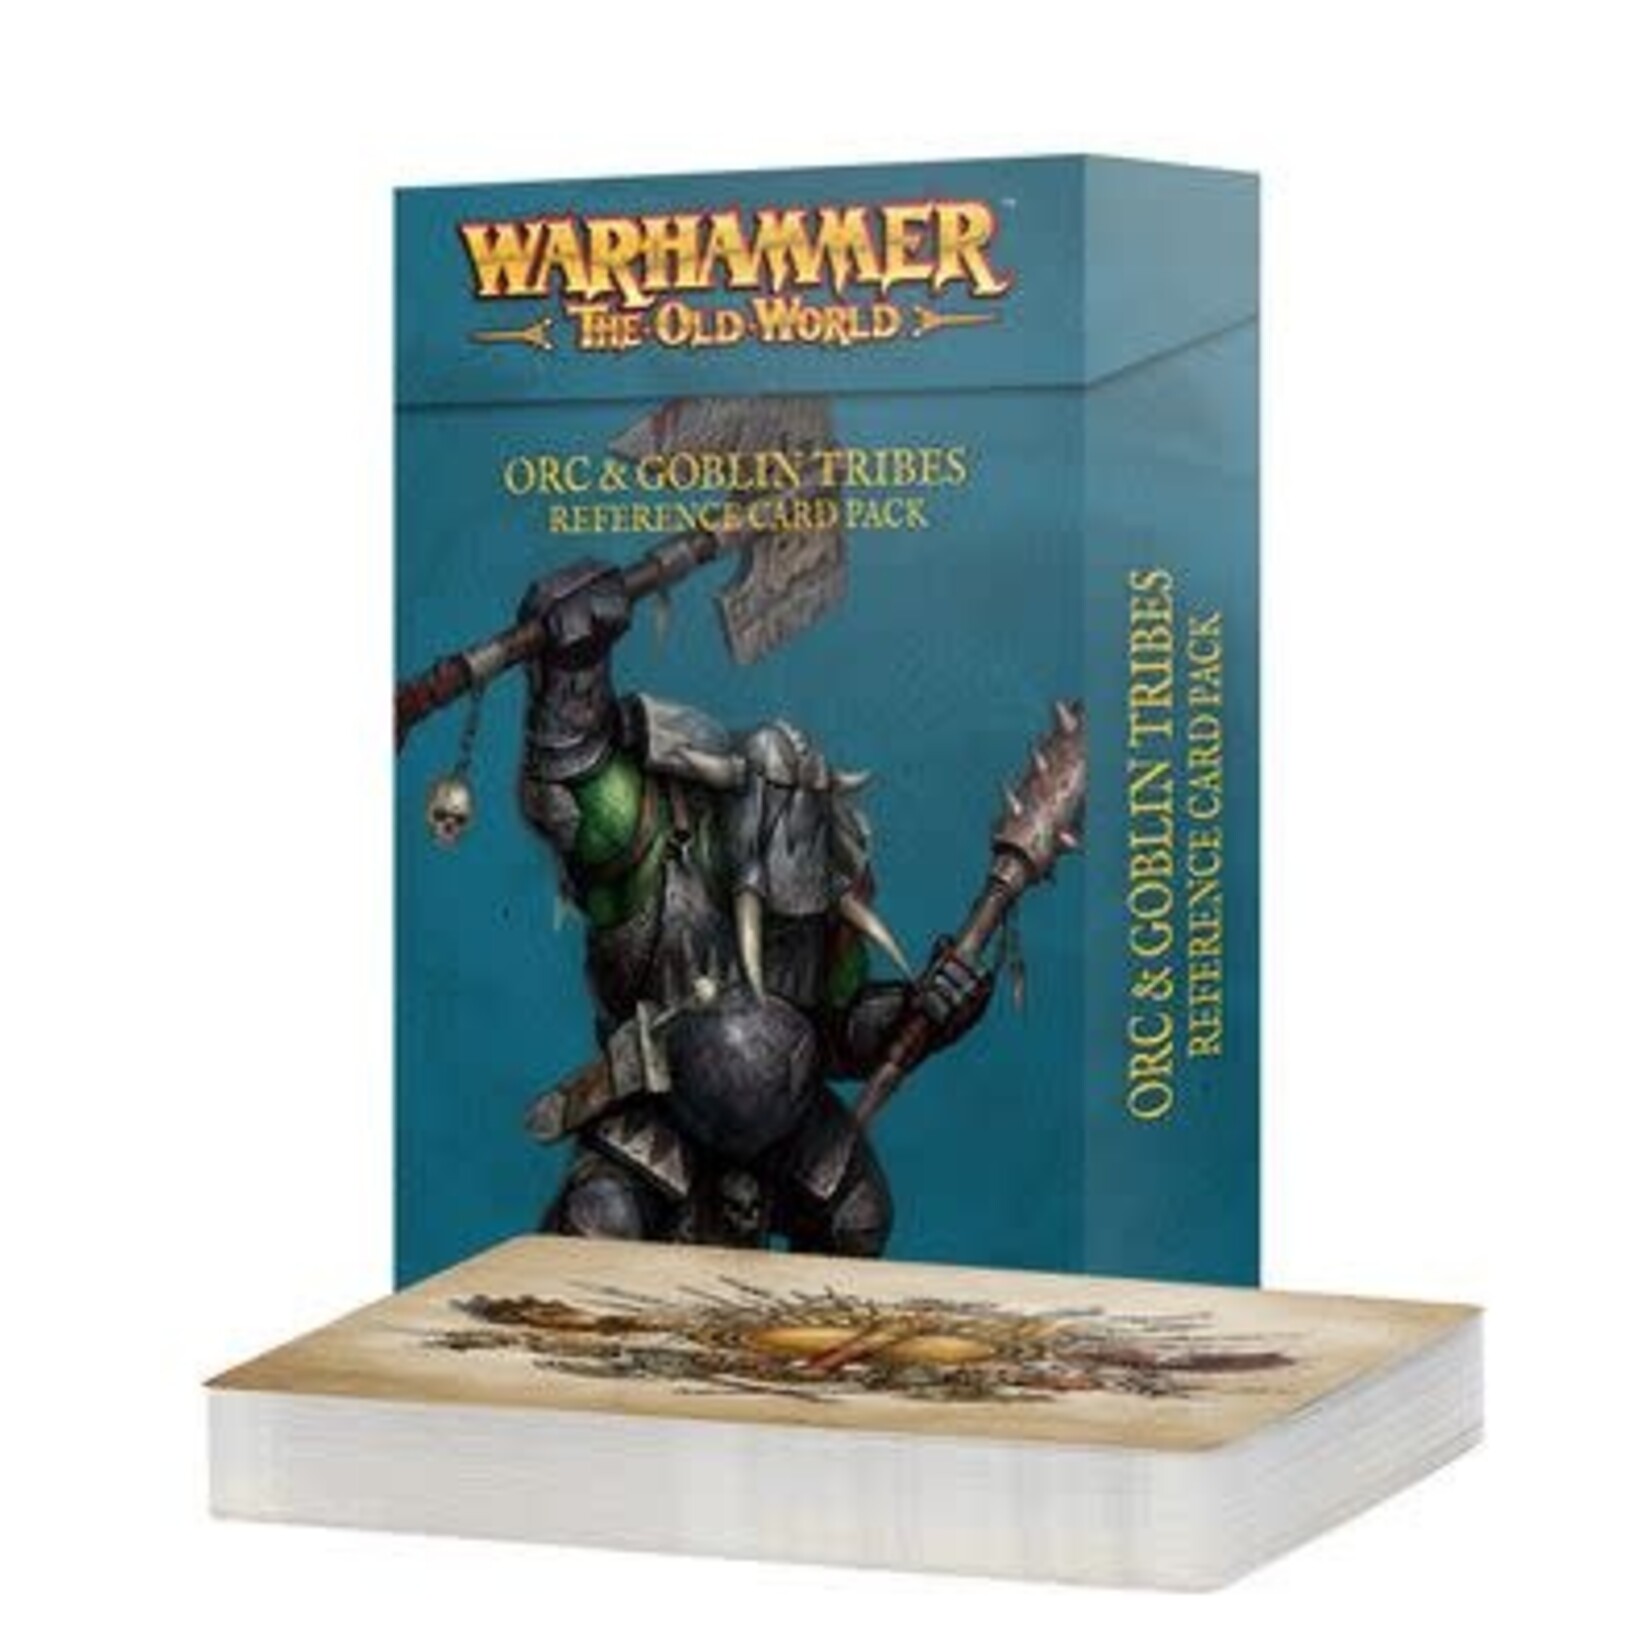 The Wargamers Guild Orc & Goblin Tribes Card Reference Pack